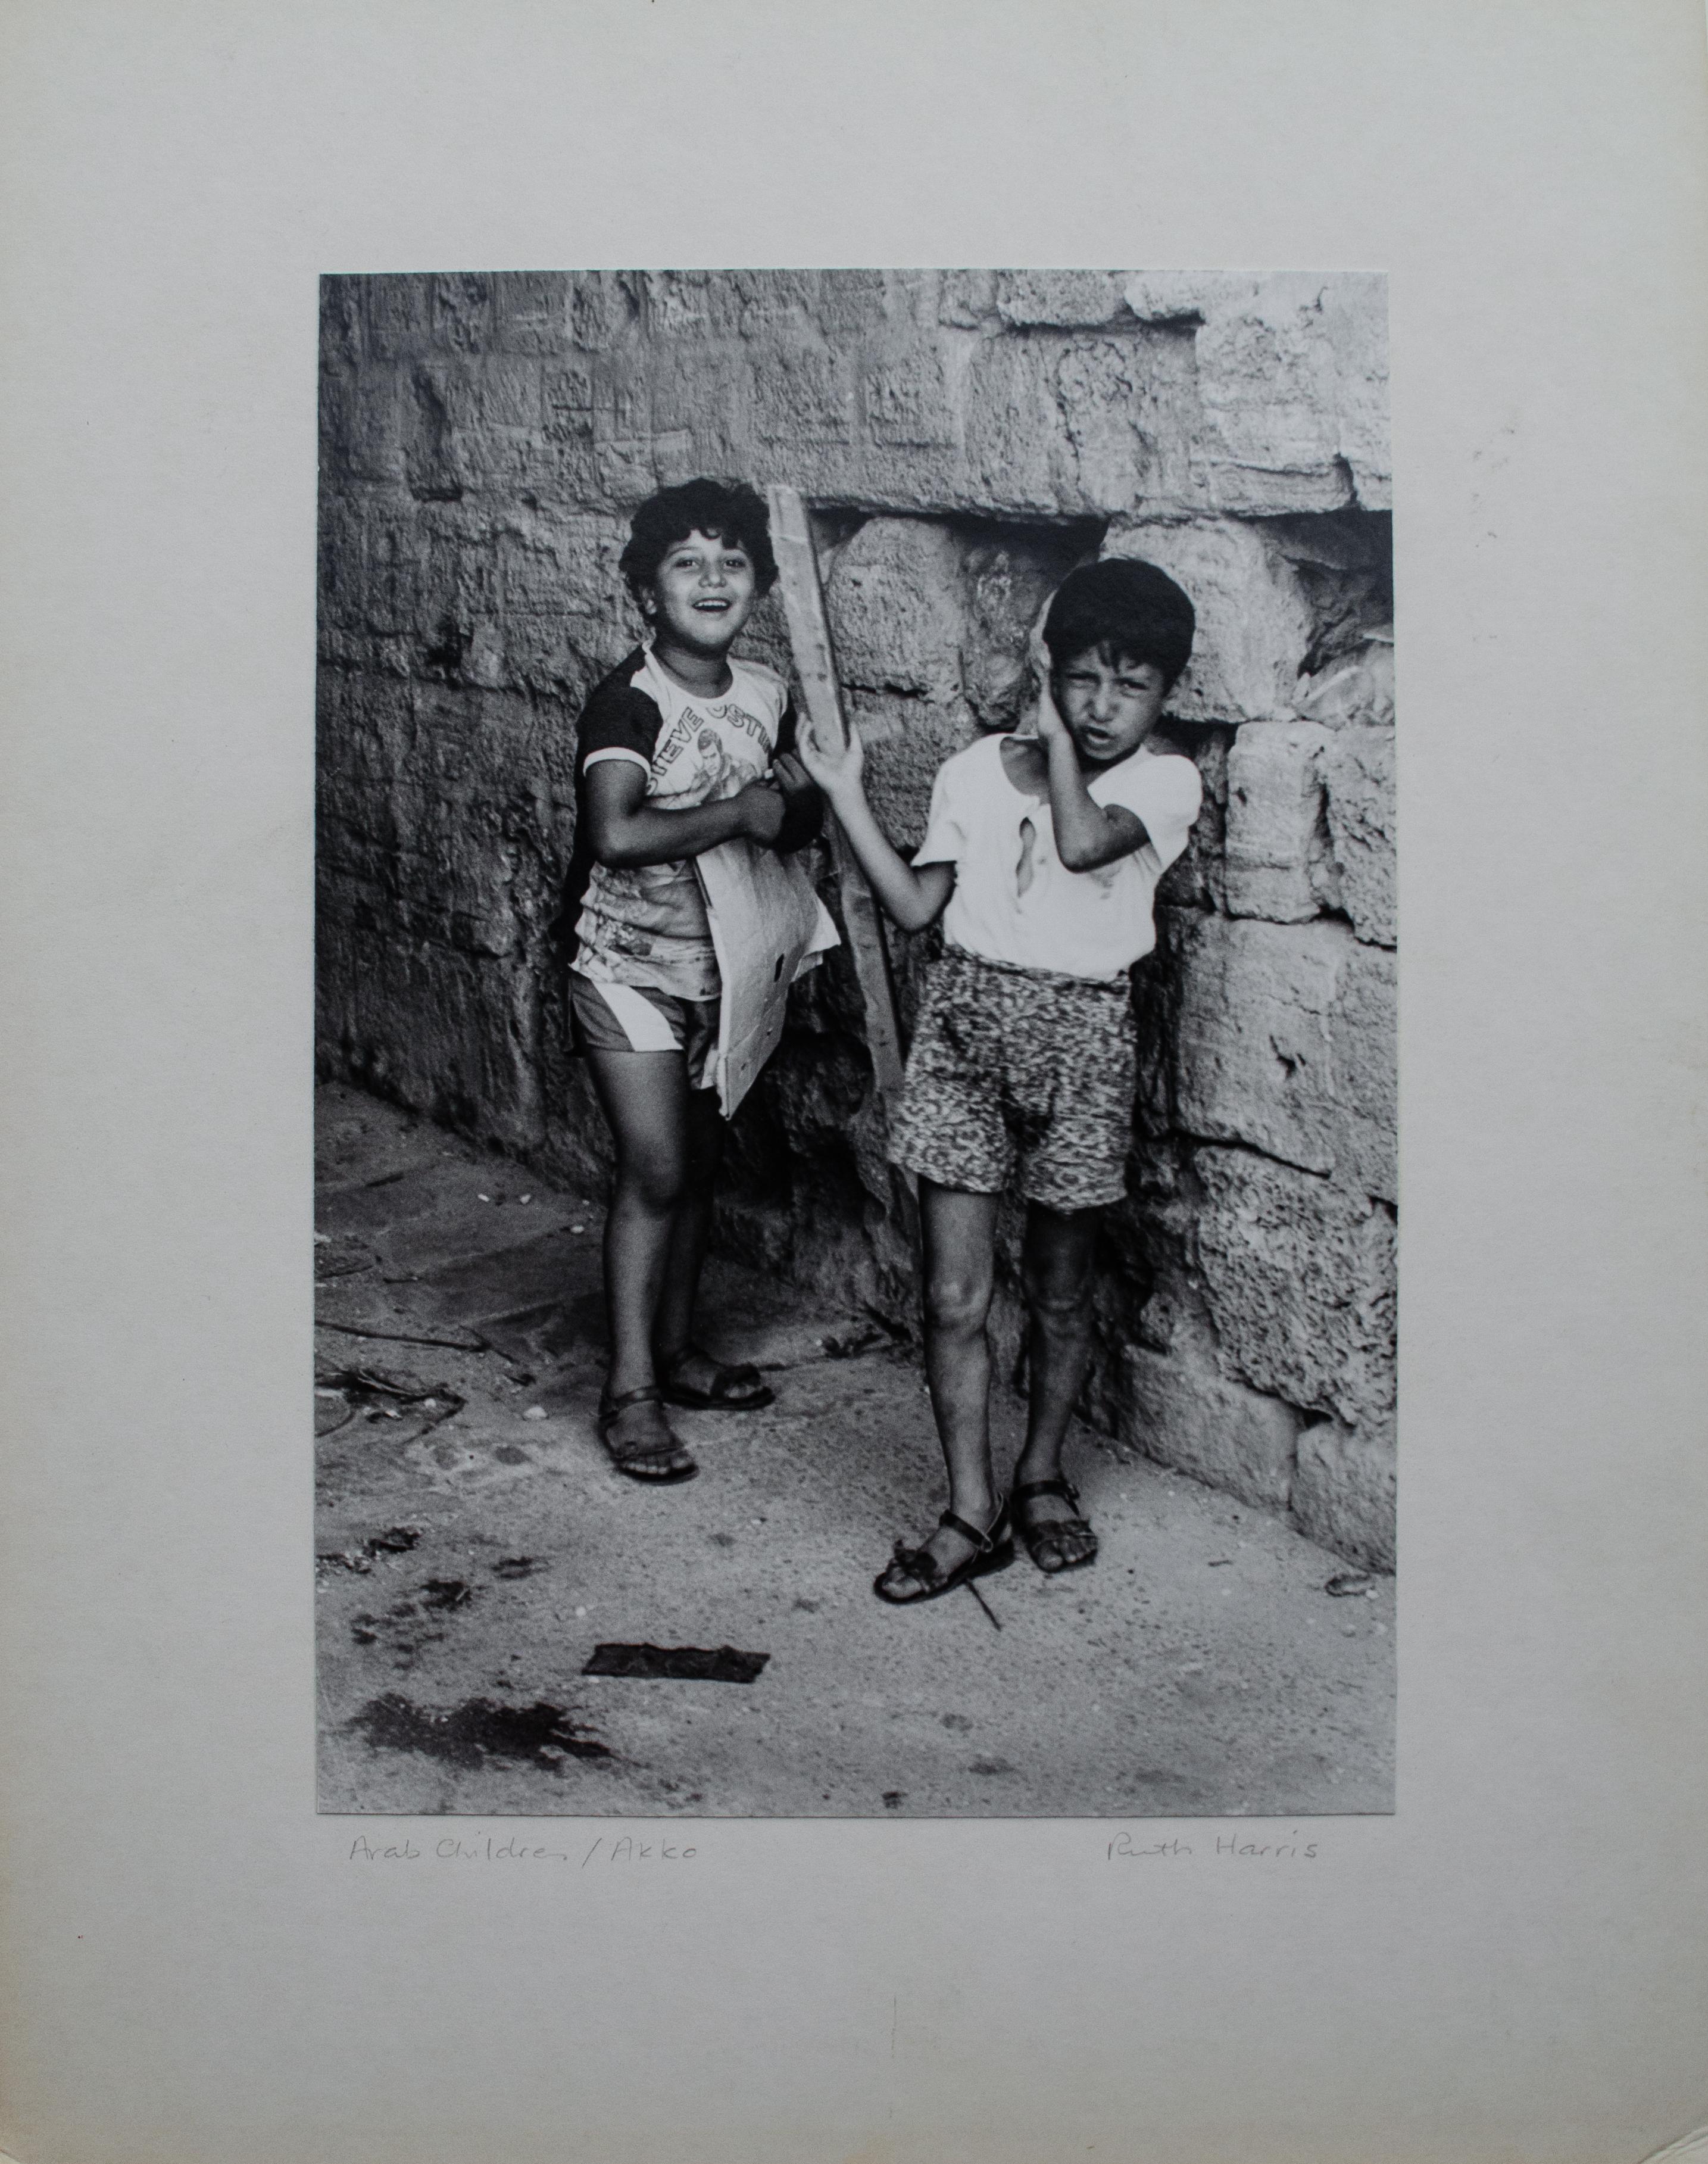 2 Black & White Photos of Arab Children, 1970s, by Ruth Harris For Sale 1